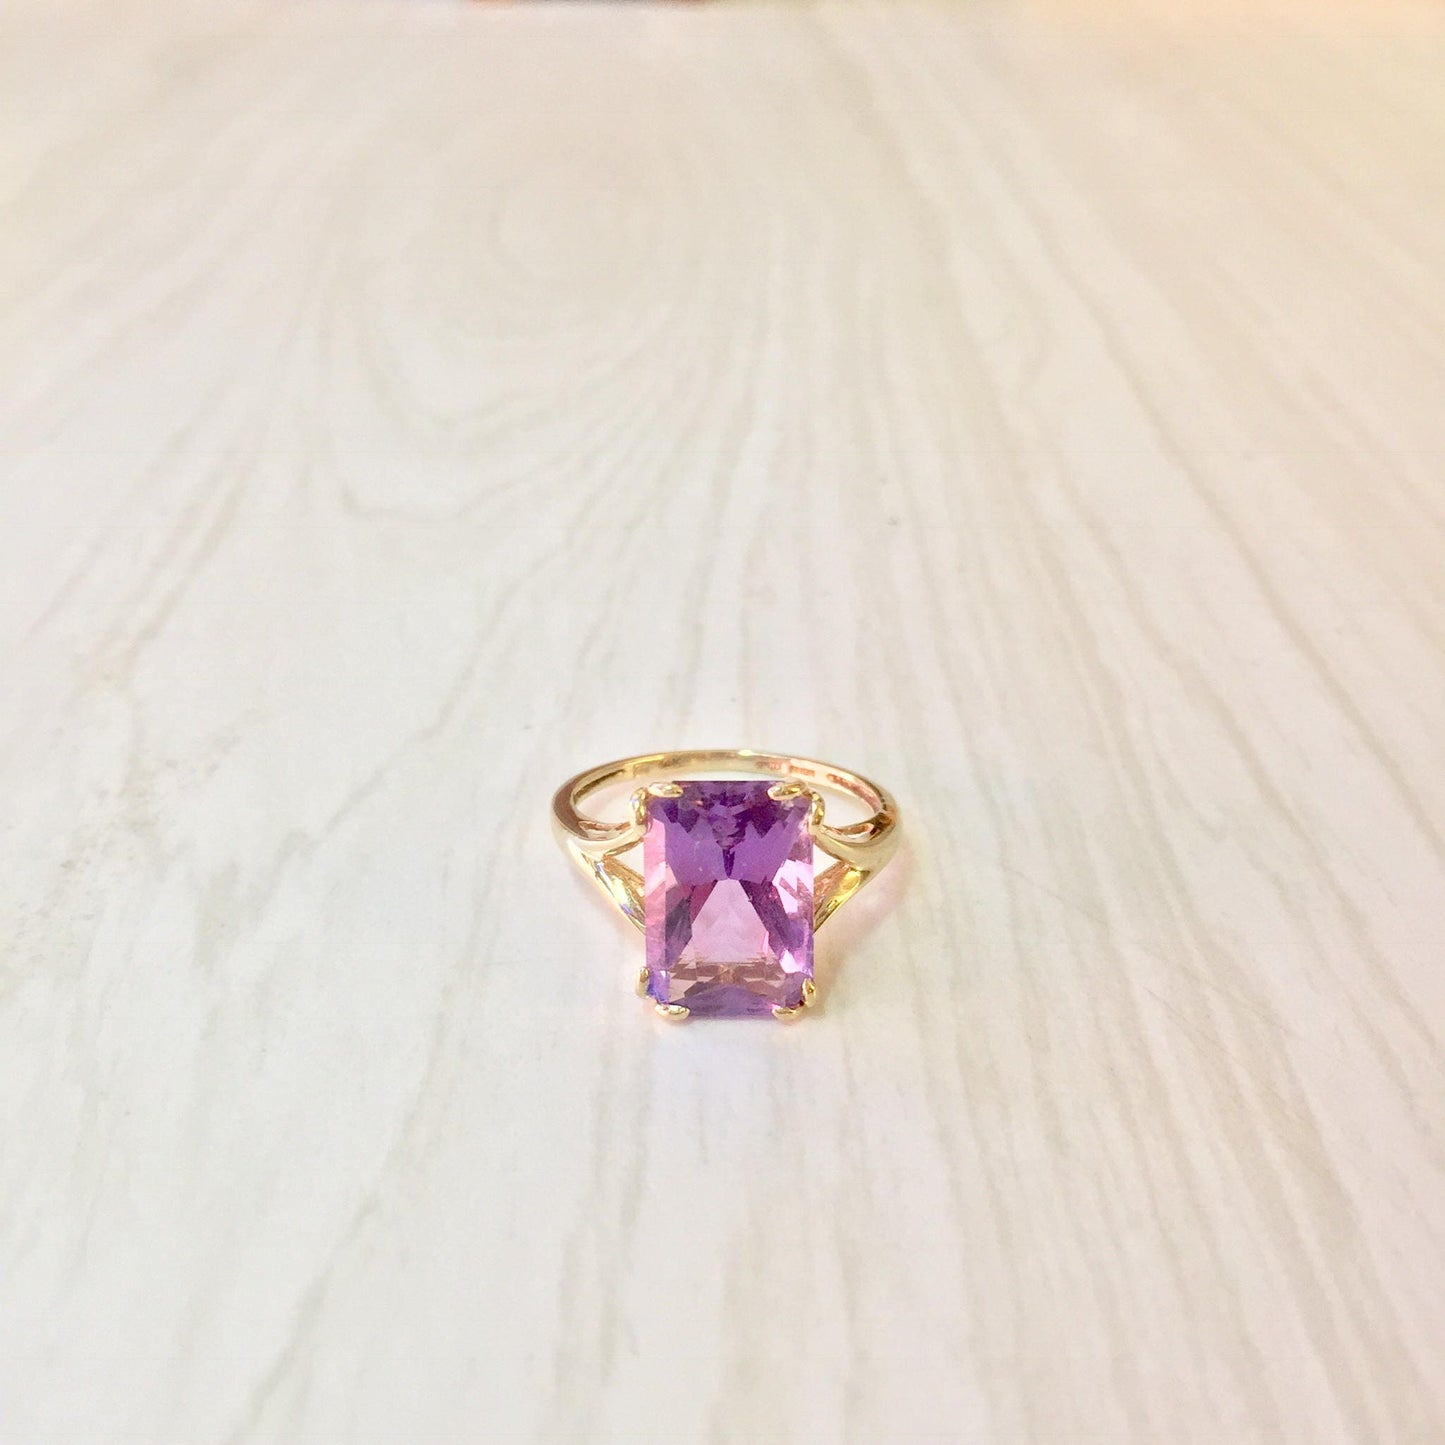 14K gold ring featuring an emerald cut amethyst gemstone, a stunning statement piece or engagement ring showcasing precious stones.